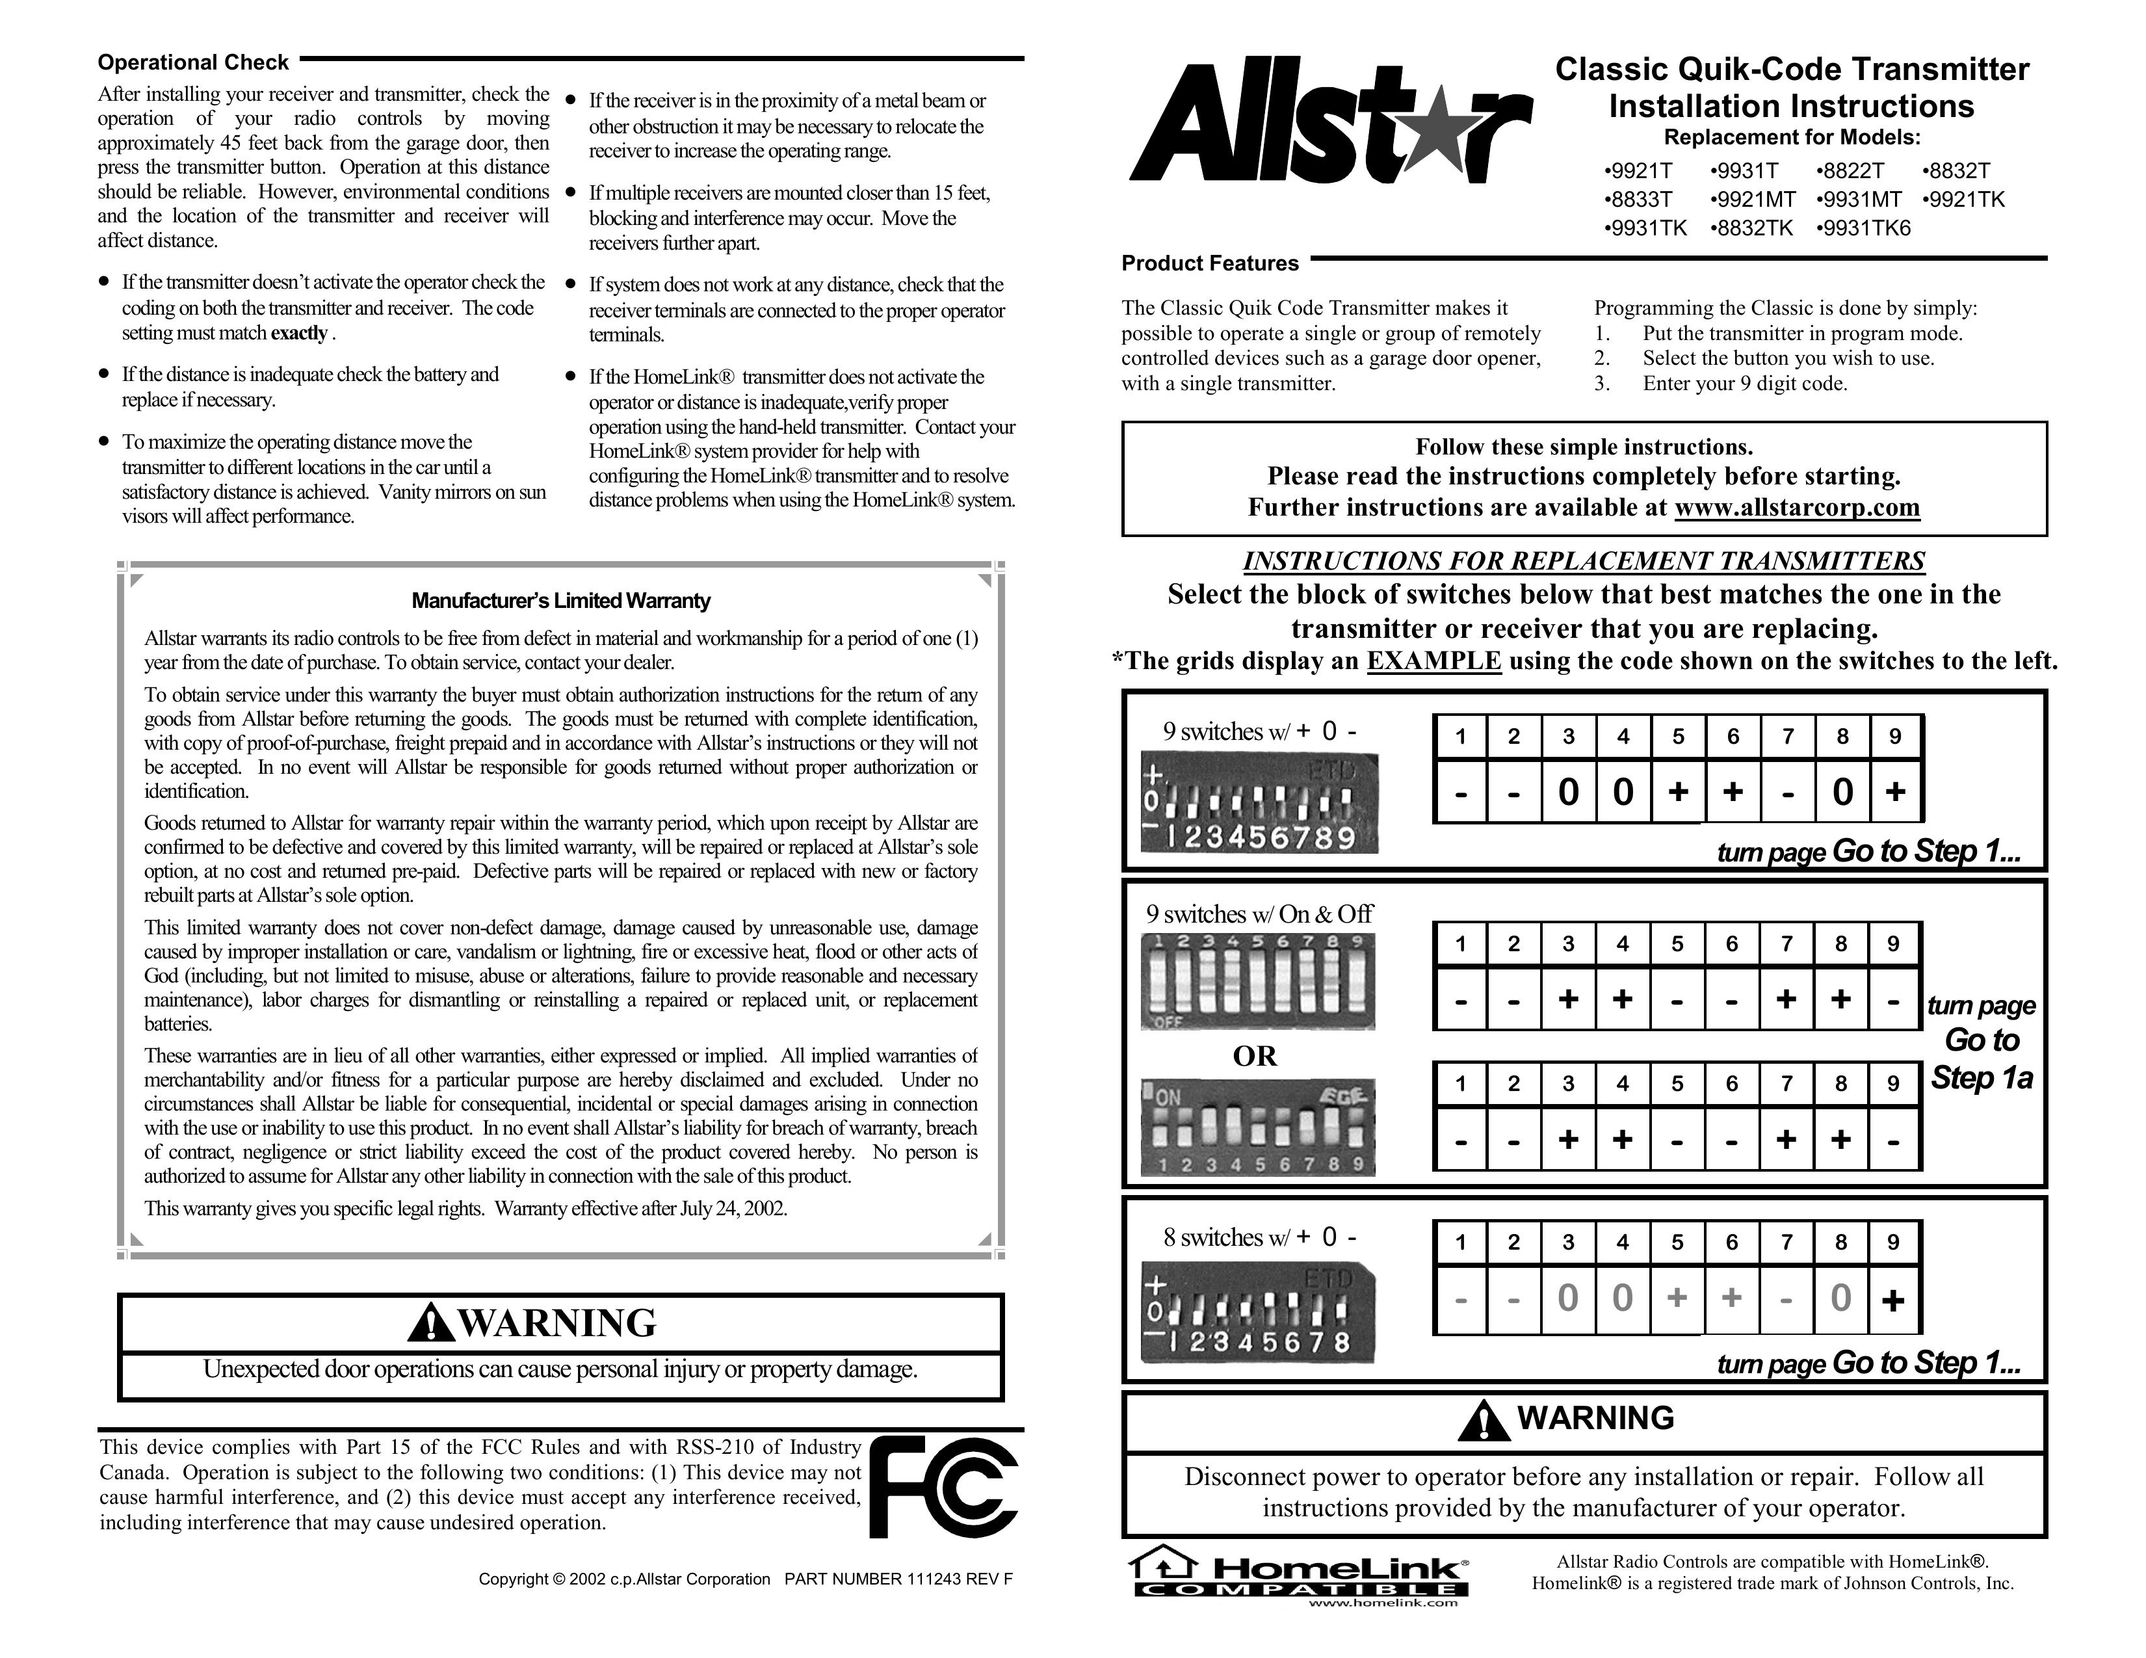 Allstar Products Group 8832T Satellite Radio User Manual